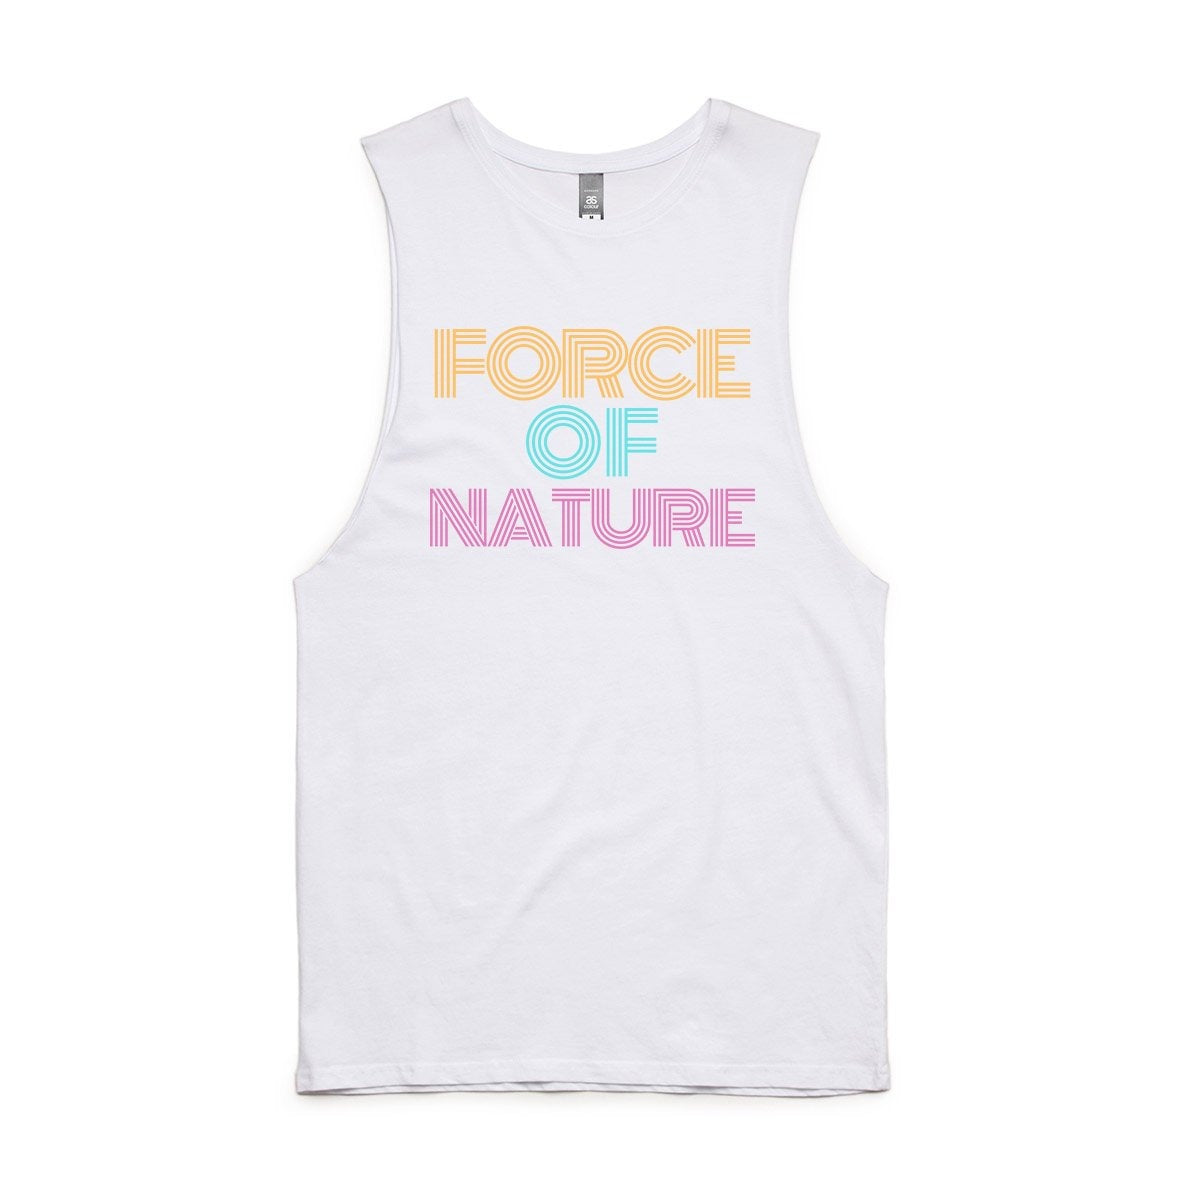 Force Of Nature - Mens Tank Top Tee White Mens Tank Fitness Mens